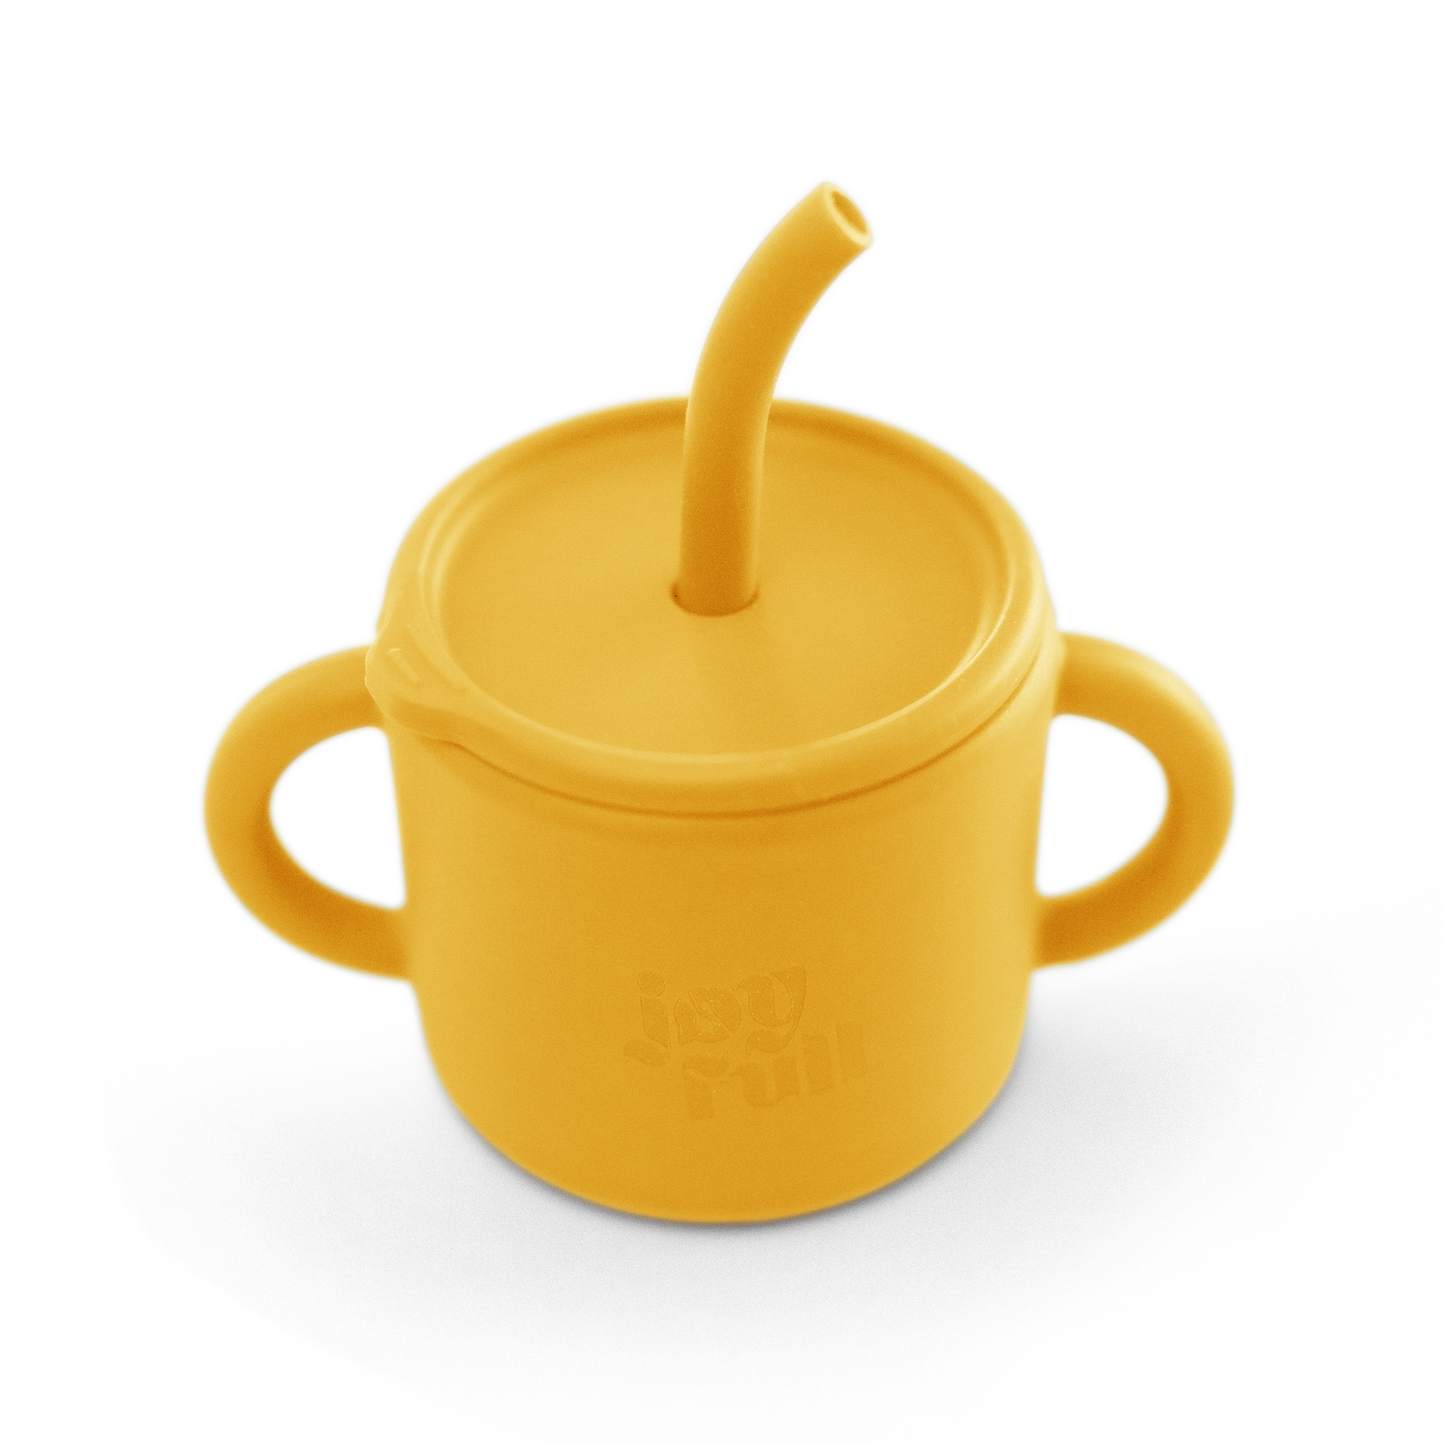 Toddler Silicone Cup with Straw Yellow - Joyfull